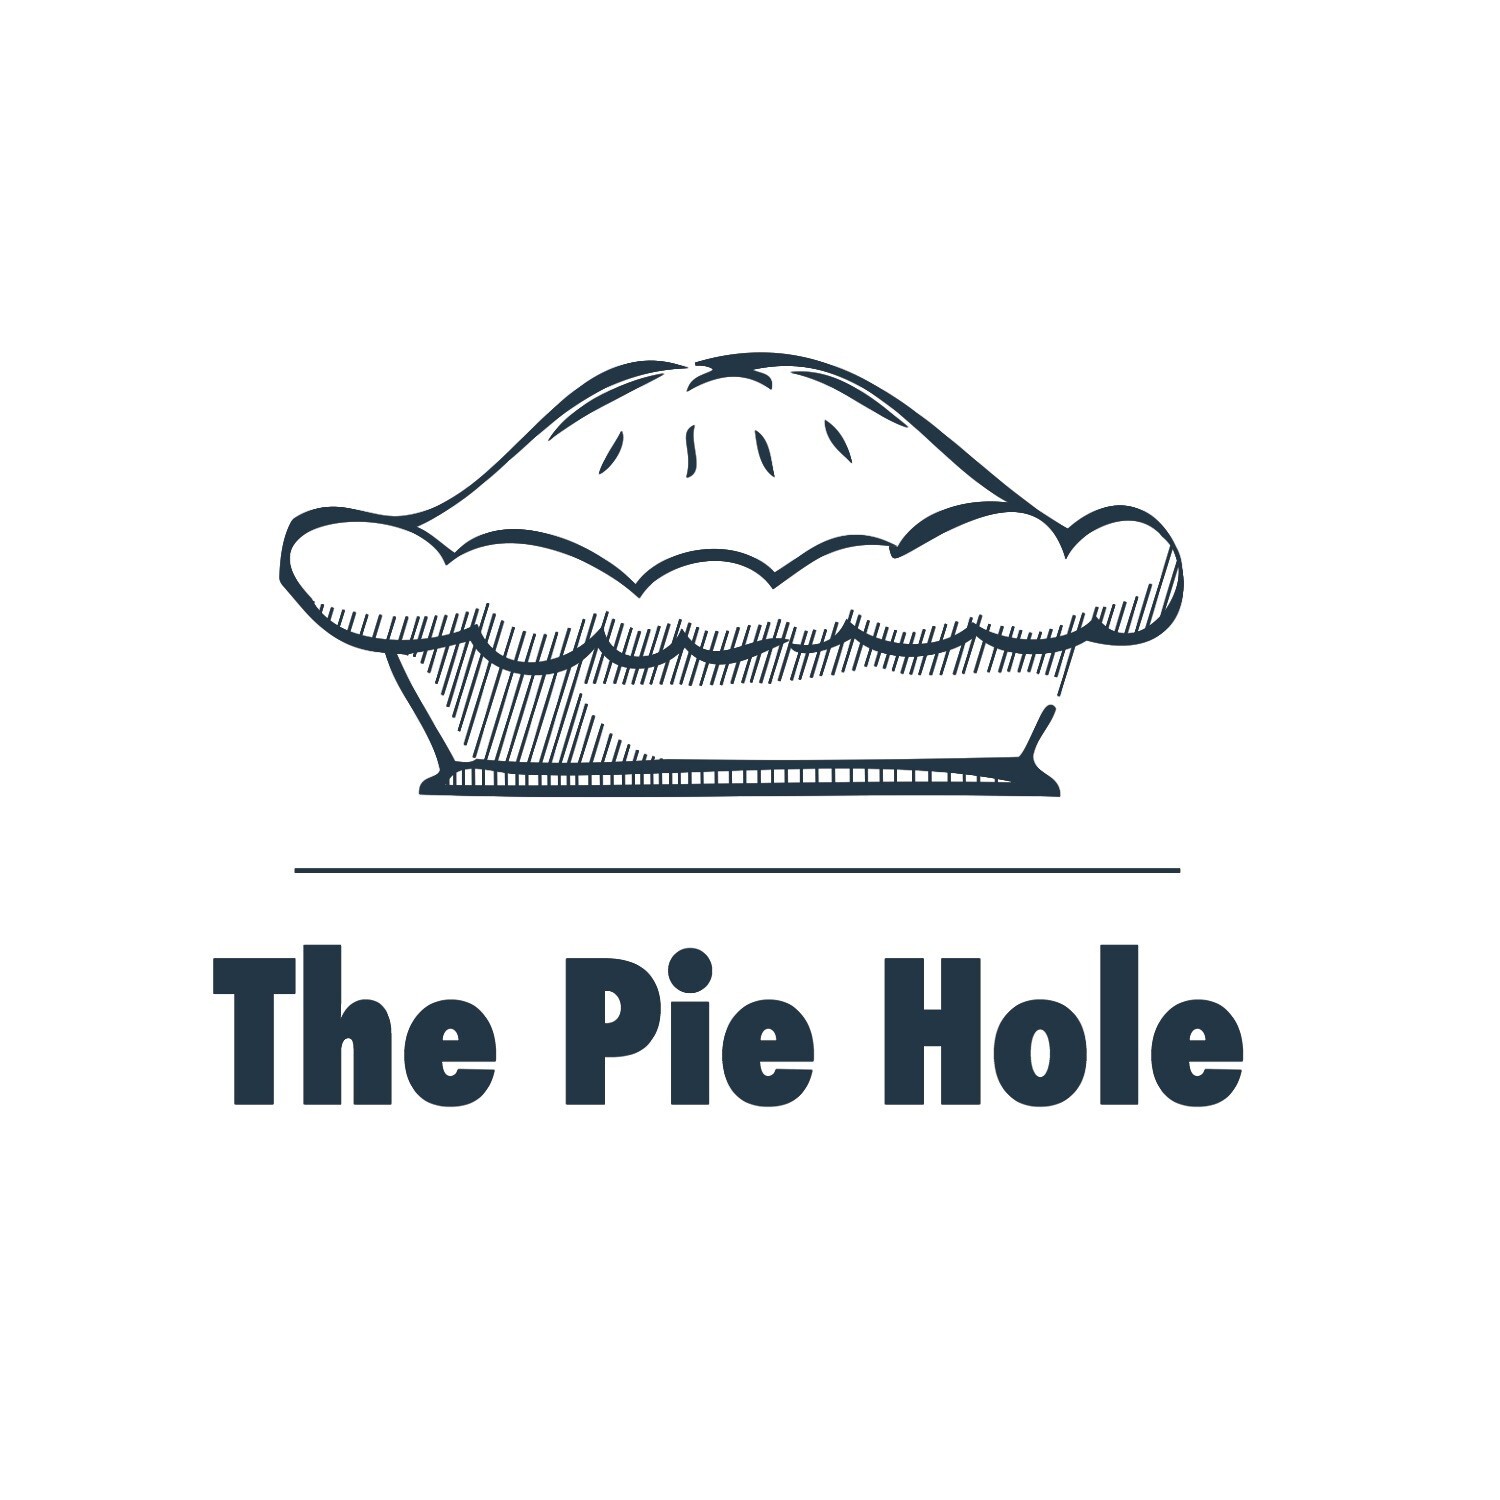 Logo for 'The Pie Hole,' featuring a hand-drawn, detailed illustration of a classic pie with a flaky crust on top. Below the pie is the name 'The Pie Hole' in bold, capitalized, sans-serif typography. The entire logo is in a monochromatic navy blue.